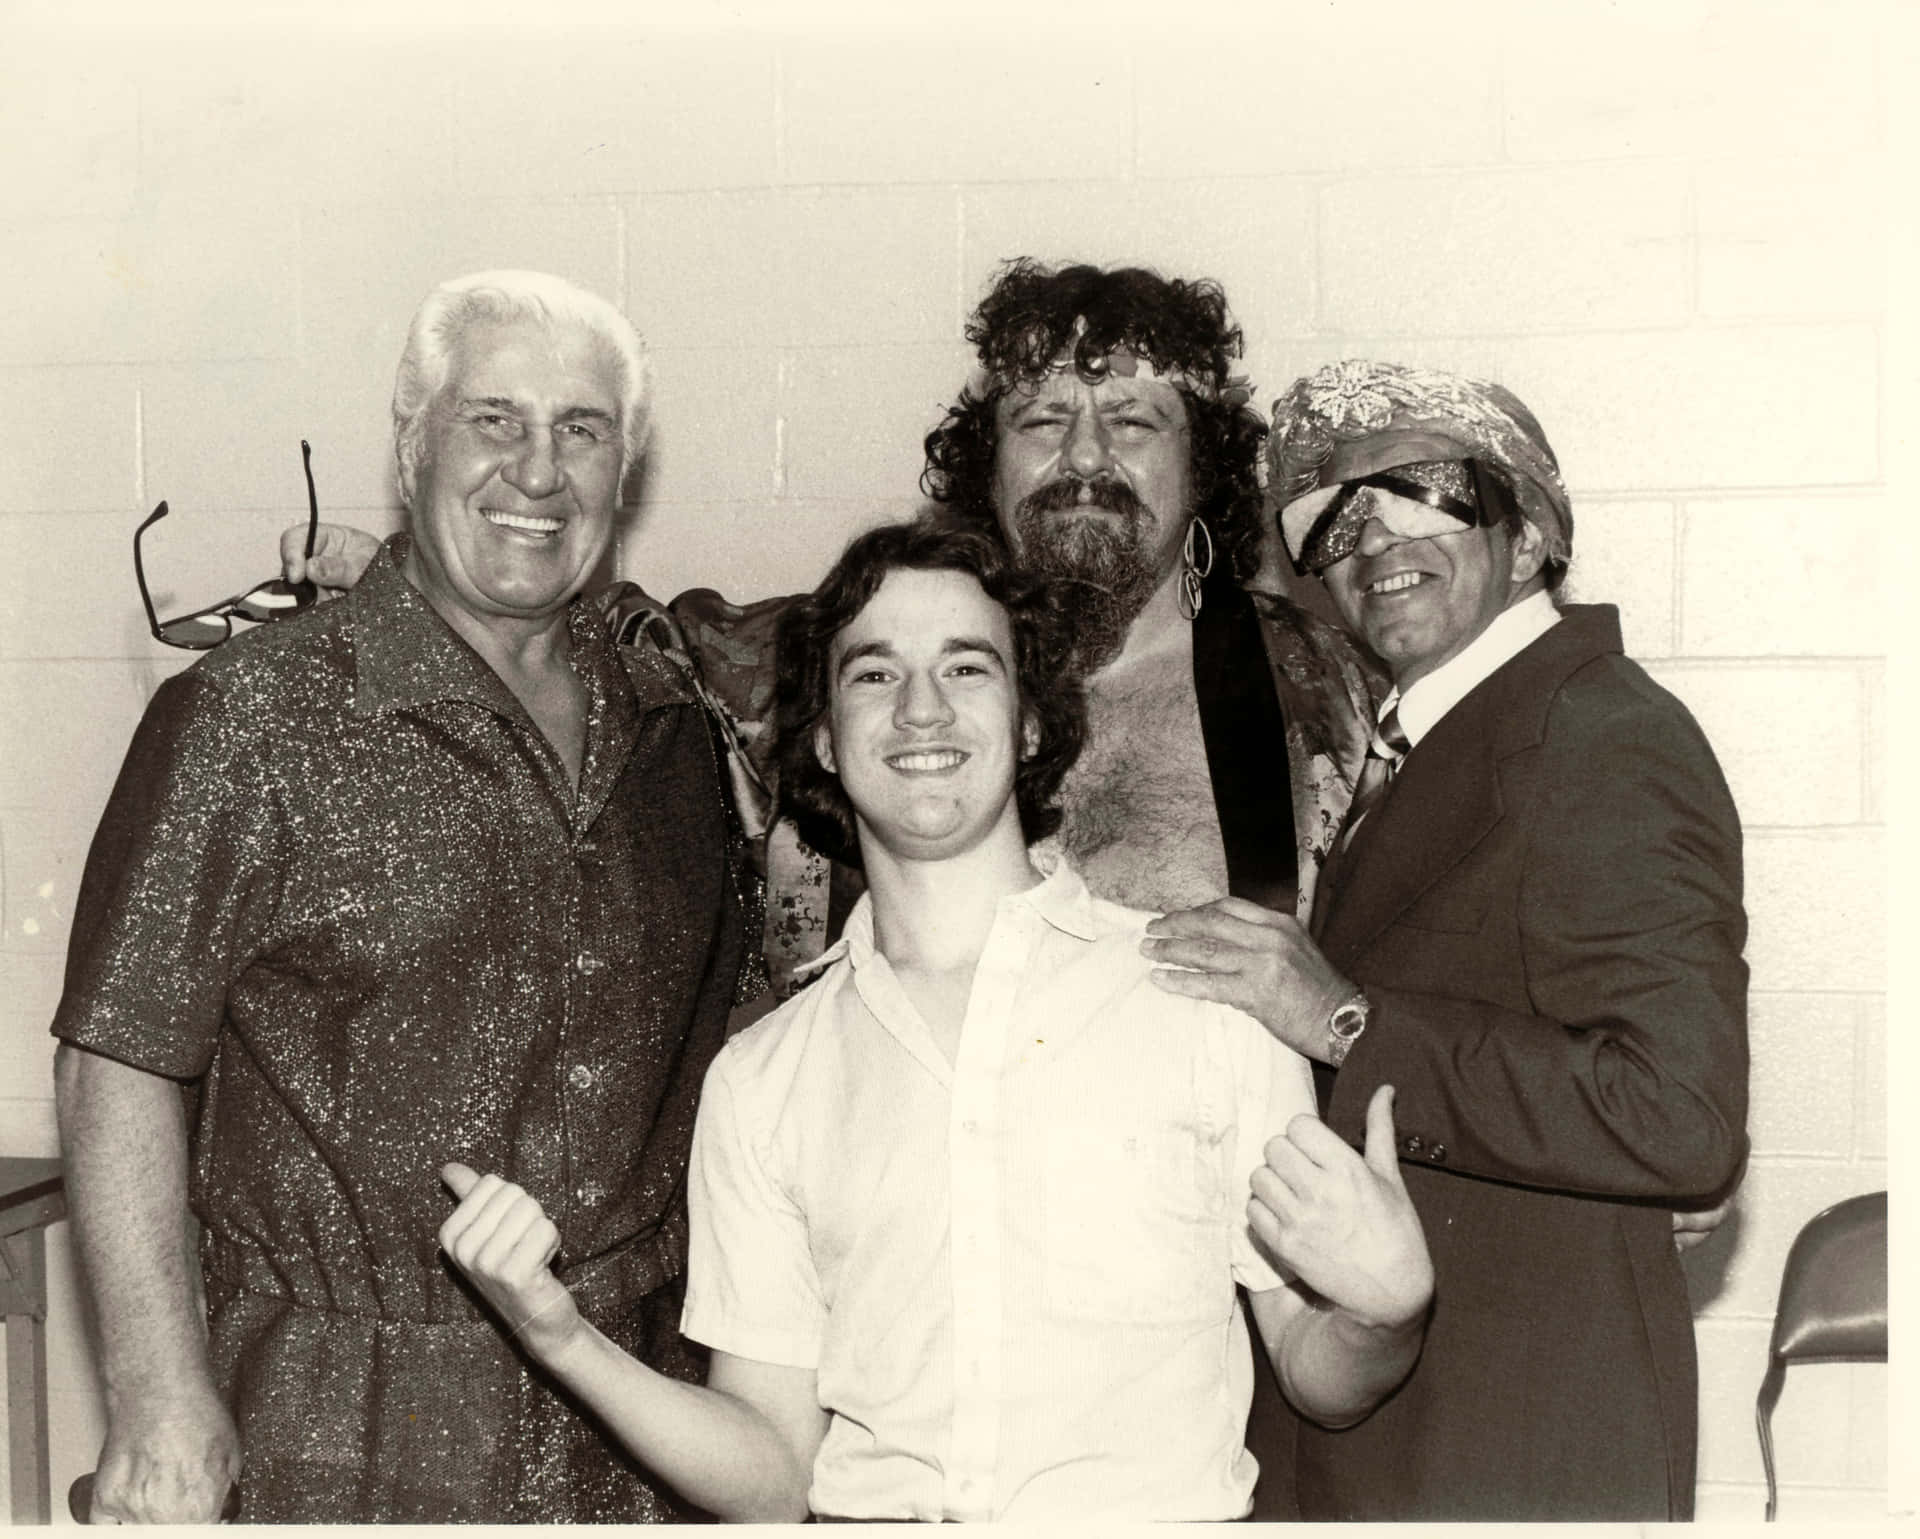 Iconic wrestling manager, Captain Lou Albano, in a candid shot with fellow management professionals. Wallpaper